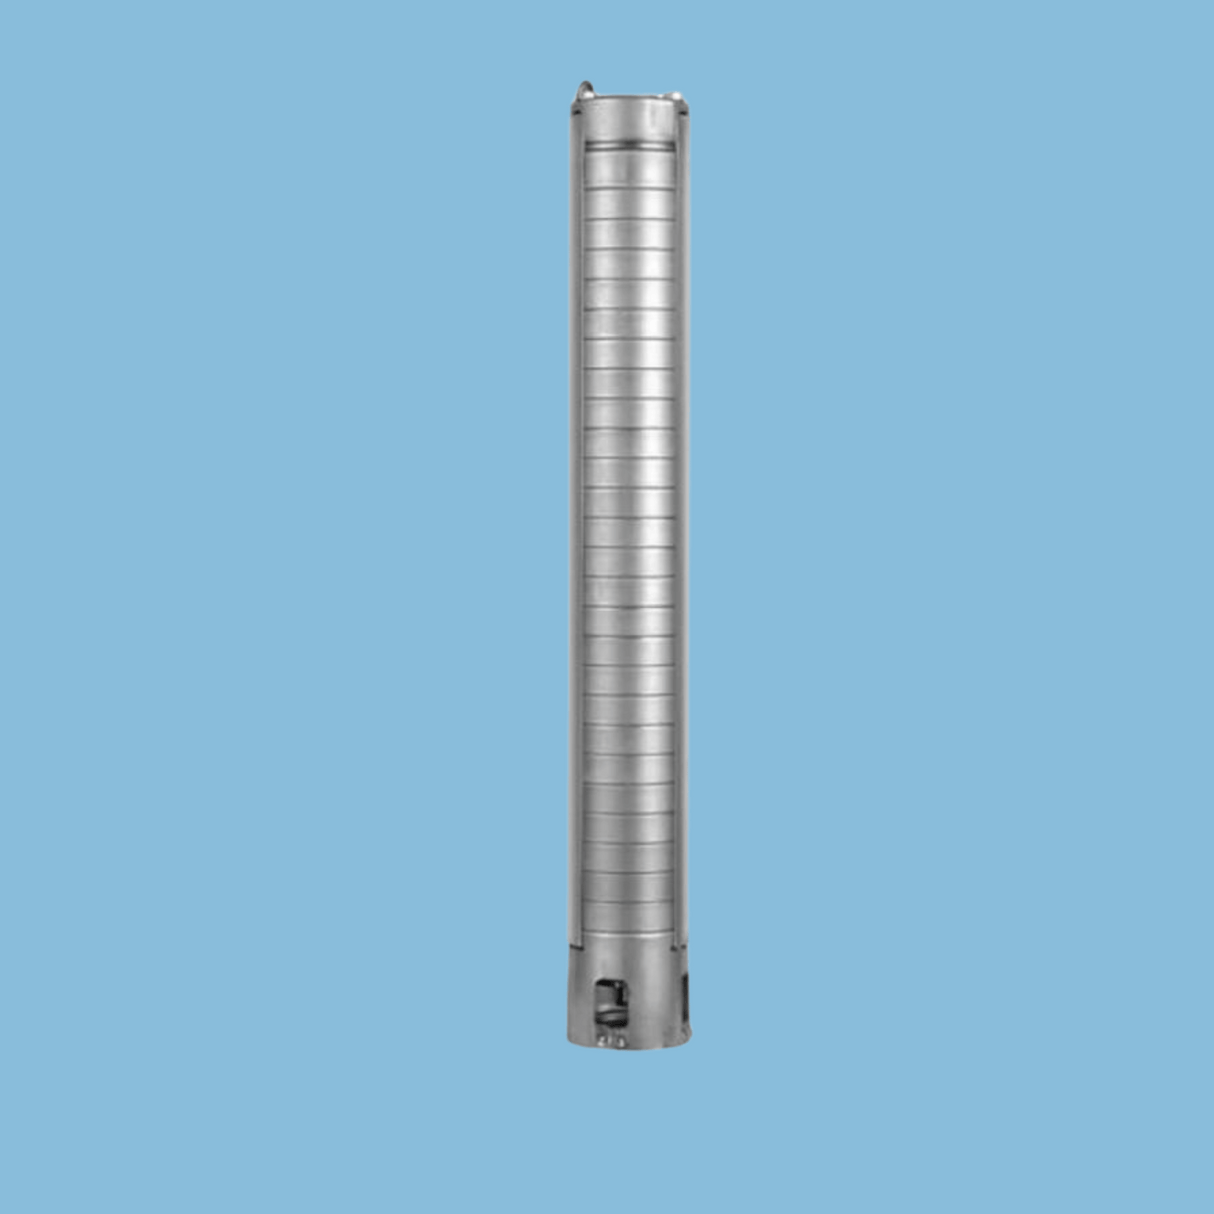 Inox ISP - 5/25, 4inch Submersible Pump for wells, 400V, 2.2kw motor, Flow rate: 4 m3/hr, Head: 118m